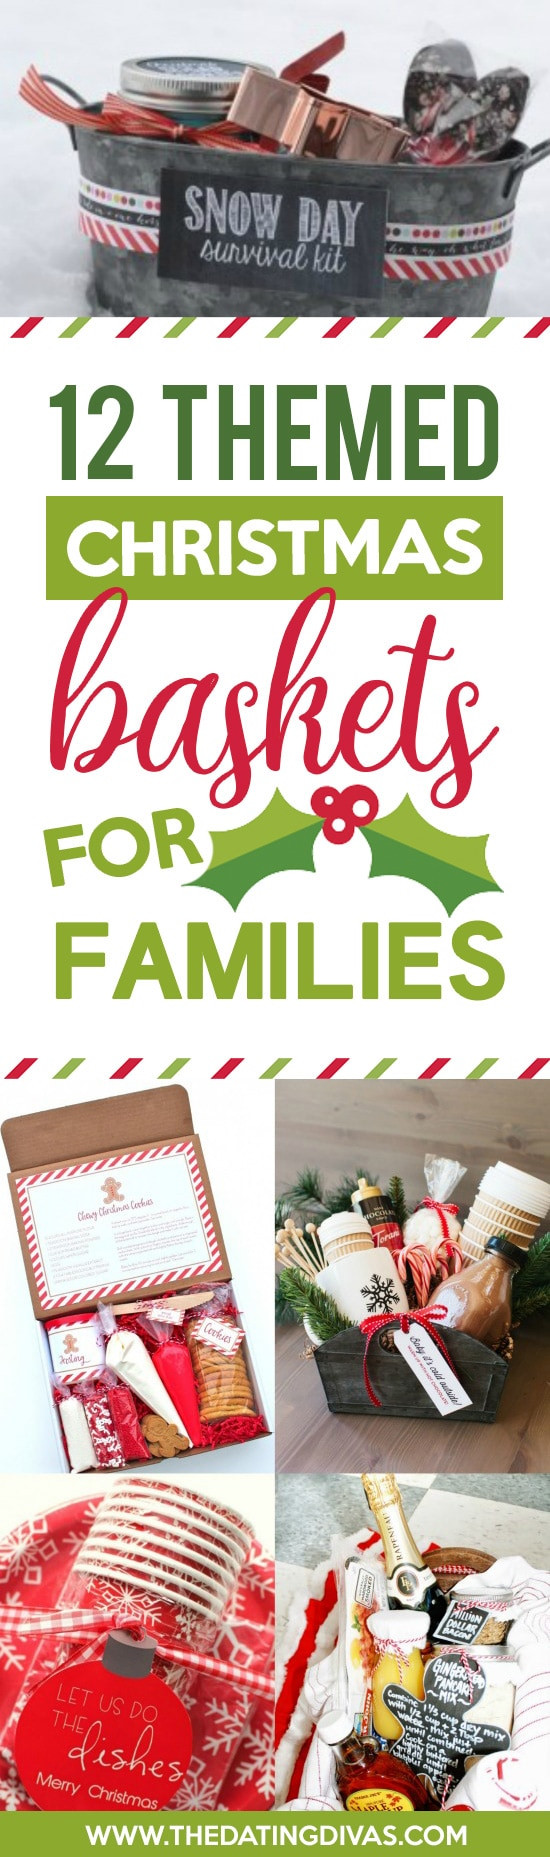 Fun Family Gifts For Christmas
 50 Themed Christmas Basket Ideas The Dating Divas